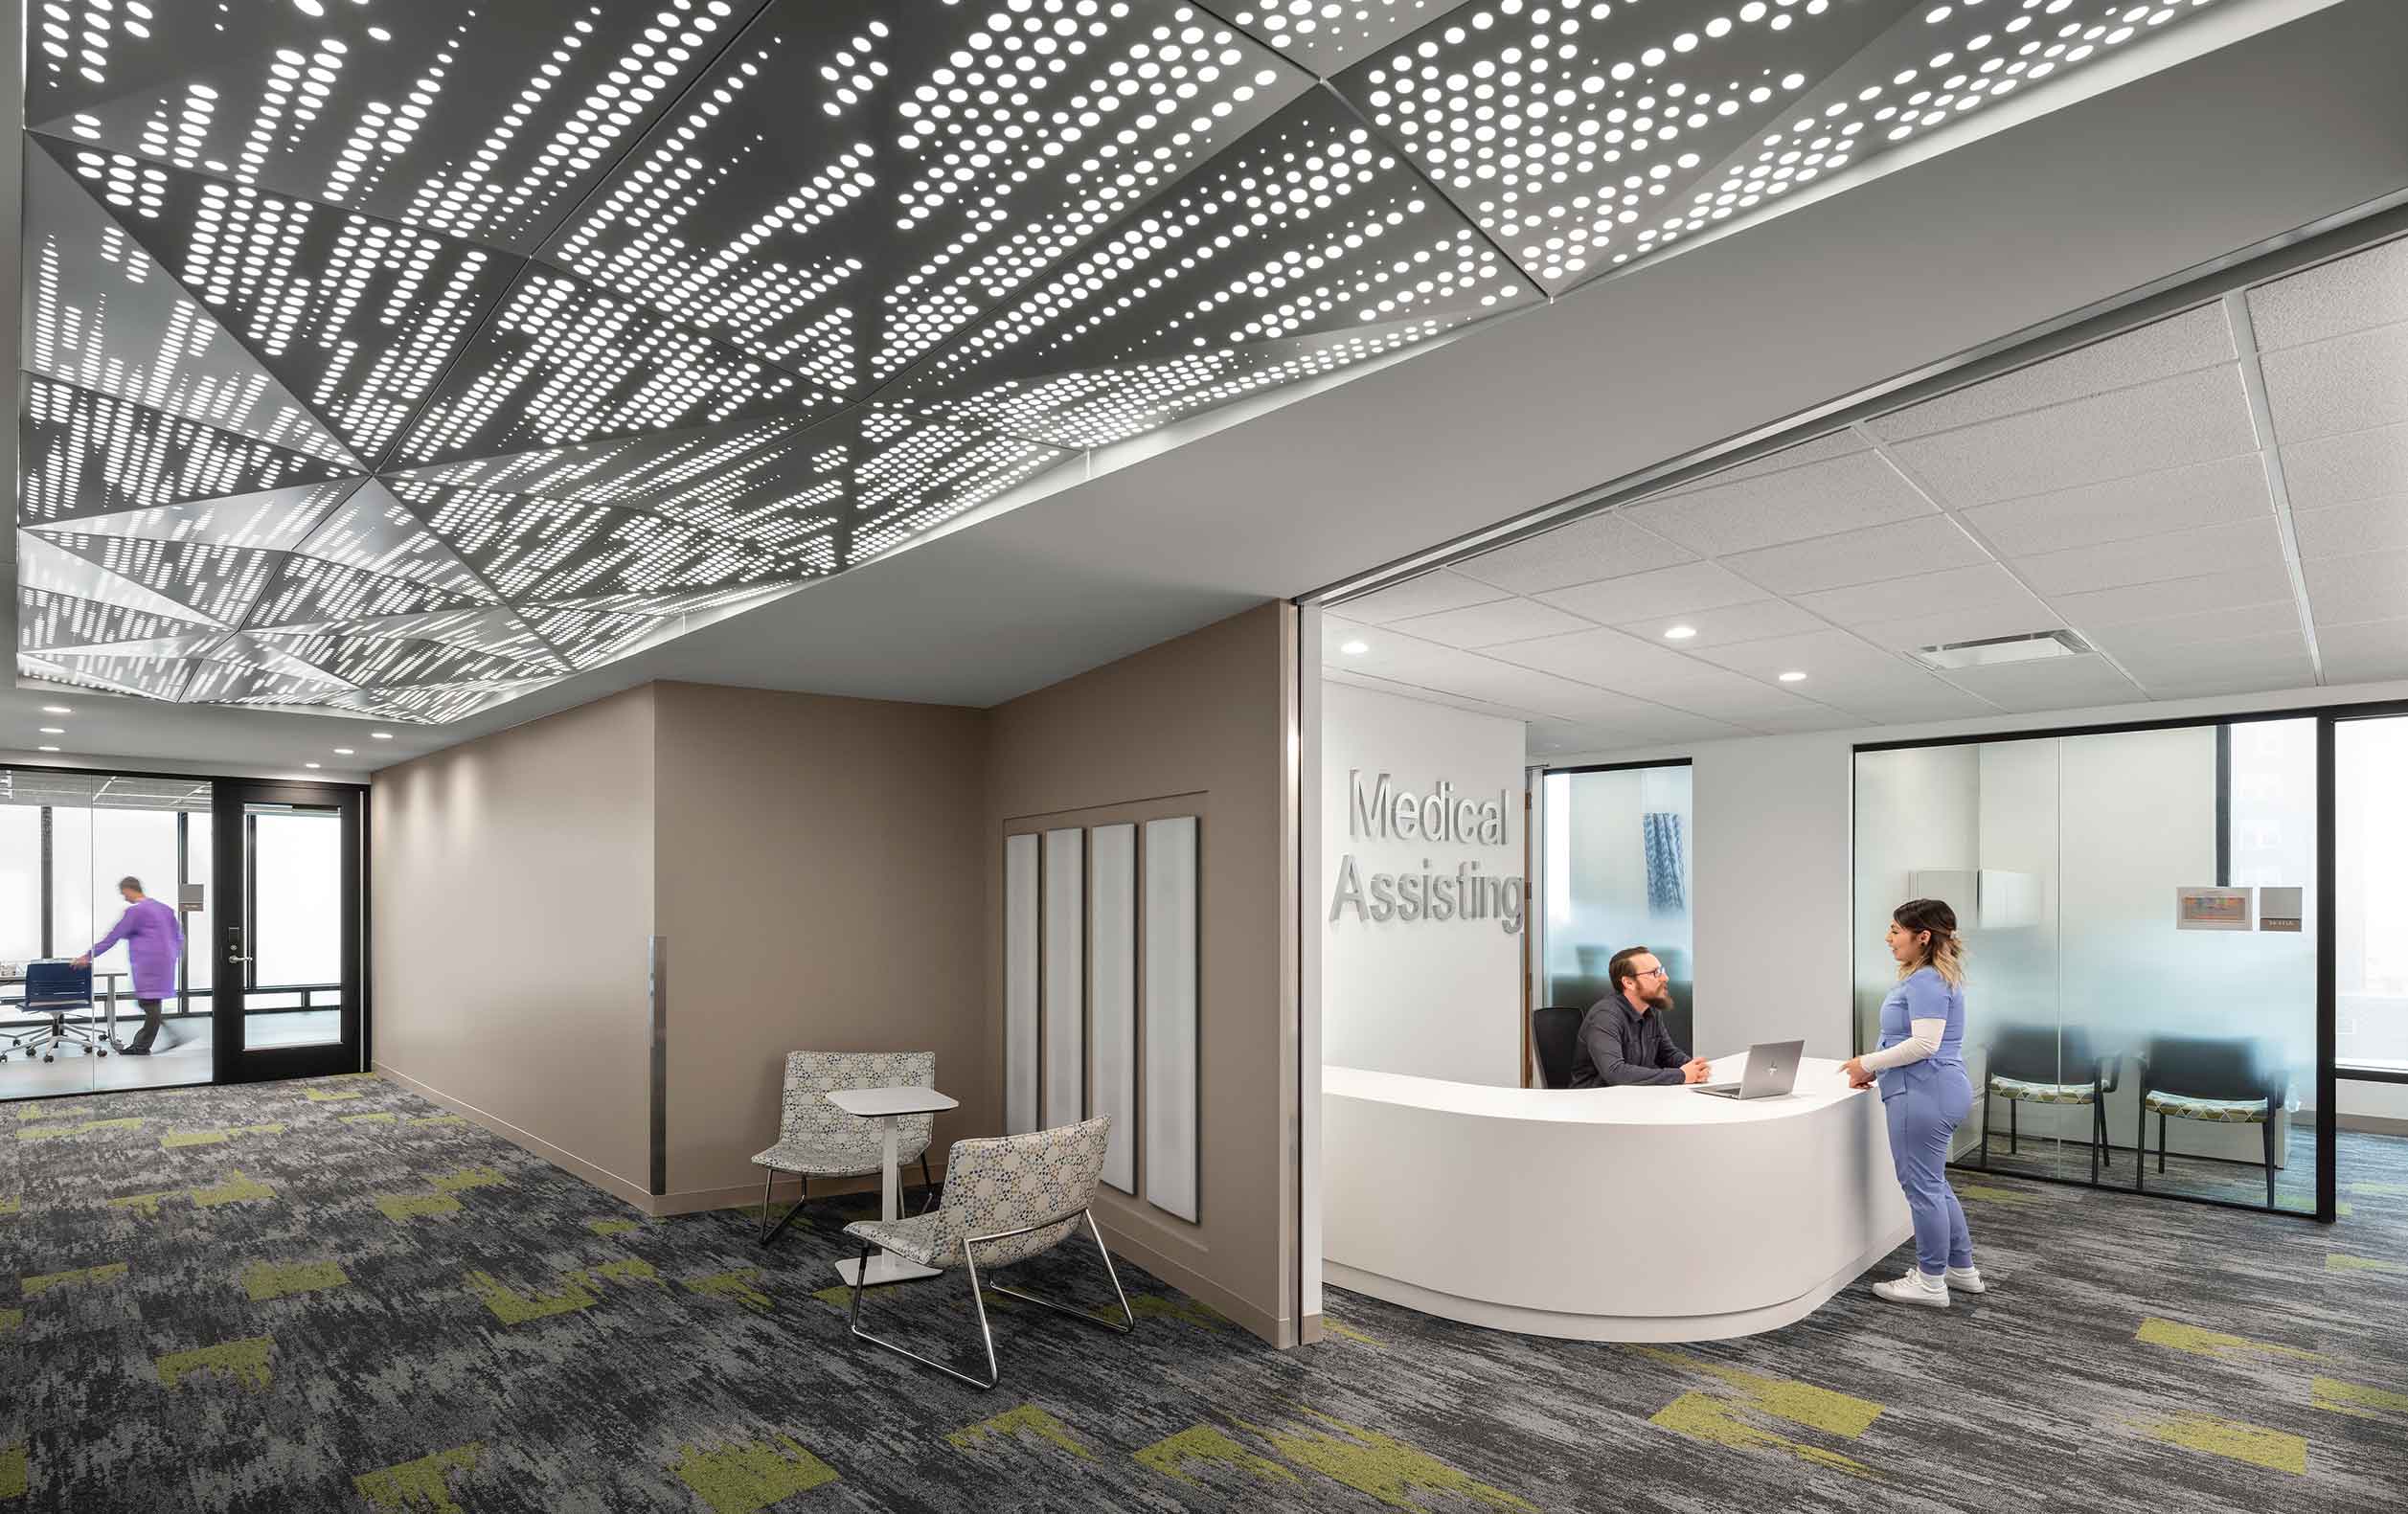 Higher education medical assisting program corridor with people at reception desk and perforated metal ceiling with lights